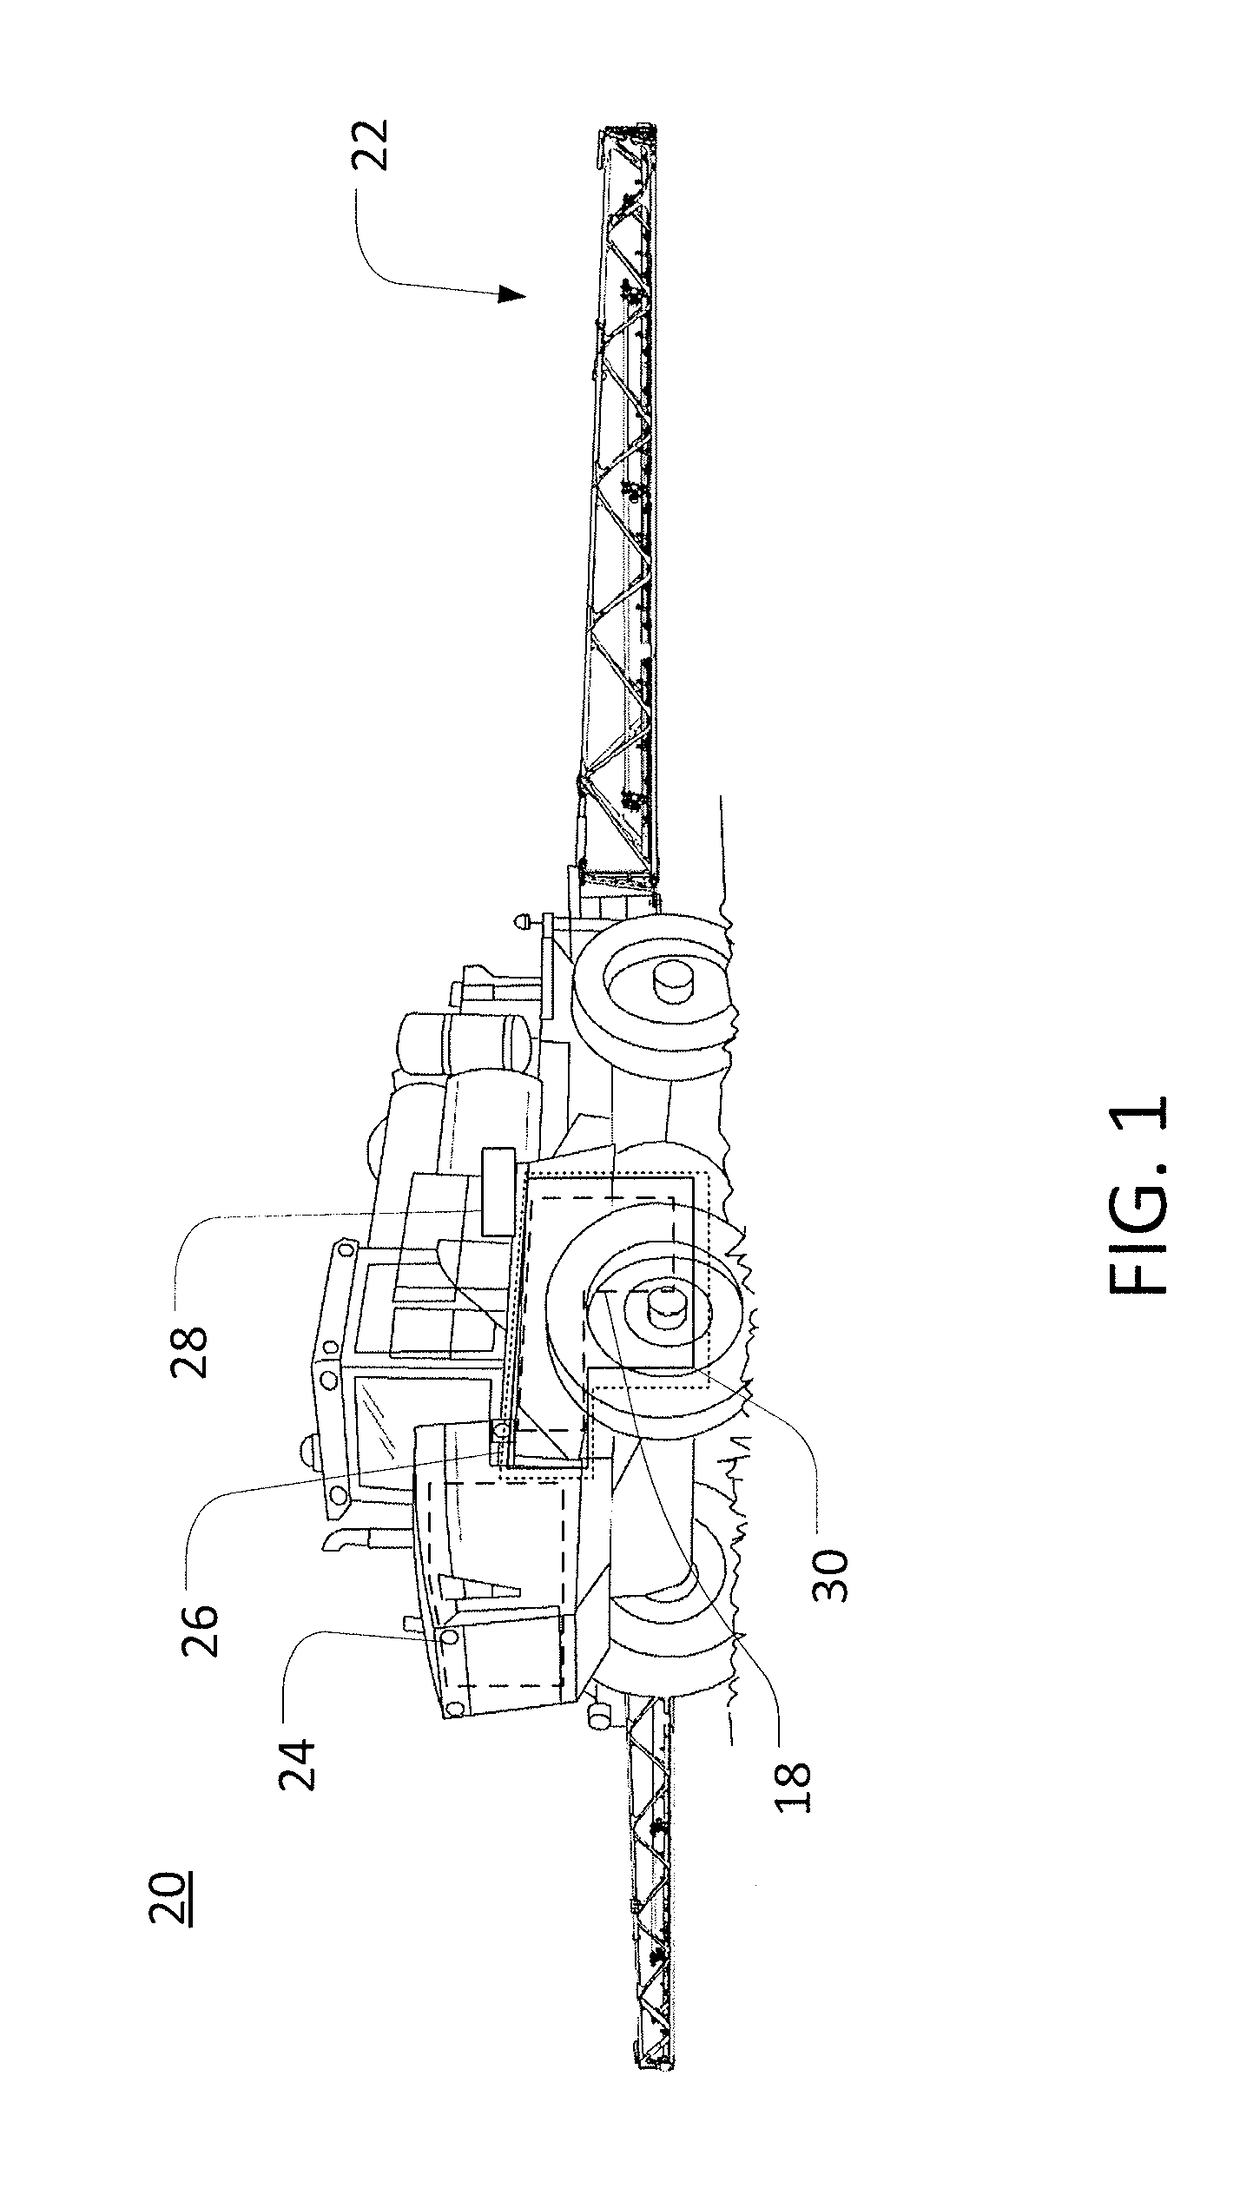 Anti-siphon arrangement for hydraulic systems